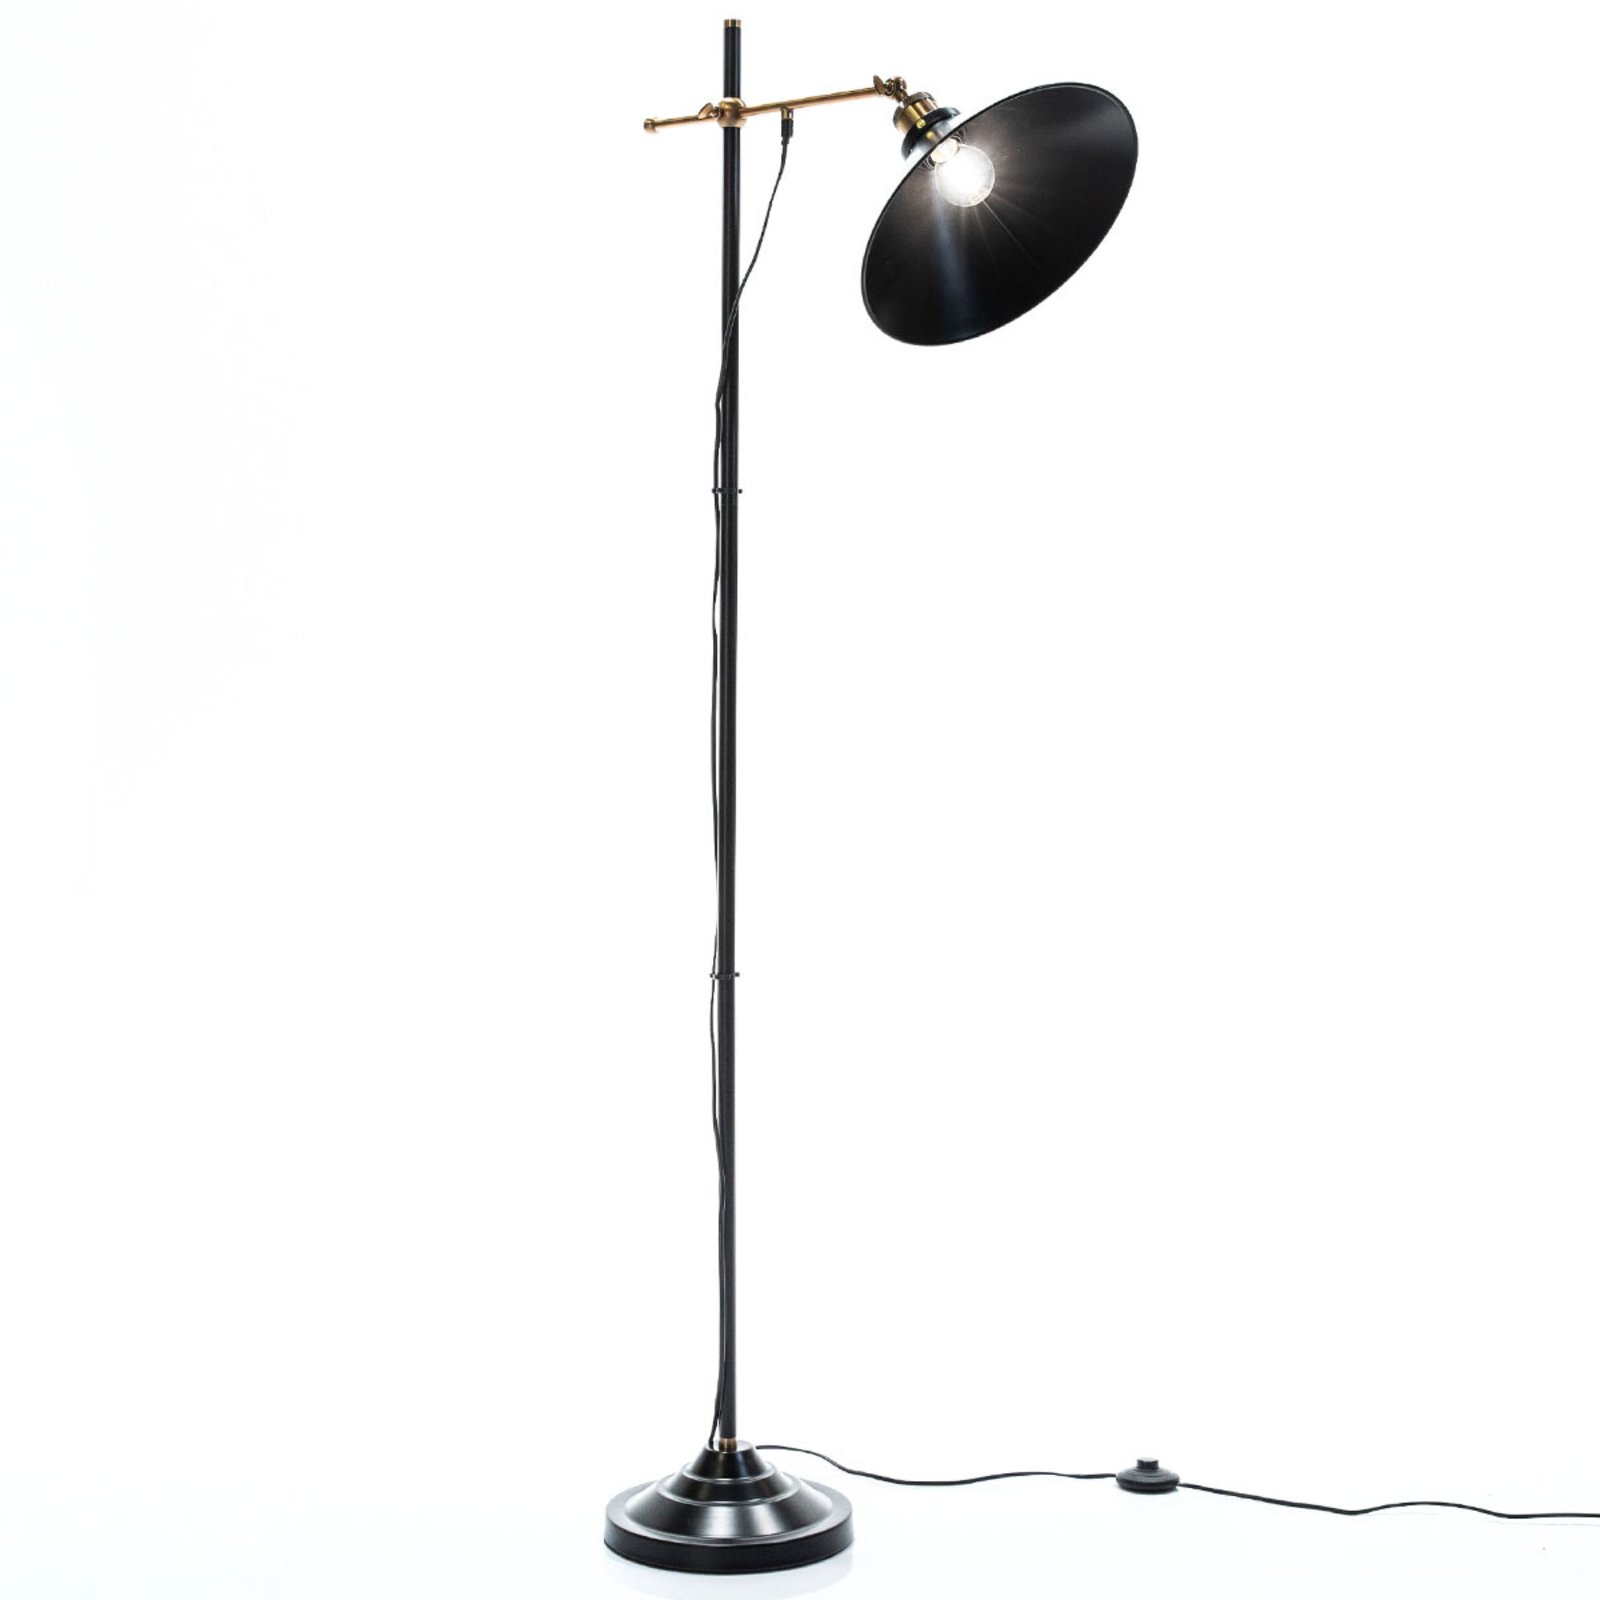 Lenius floor lamp with an adjustable lampshade